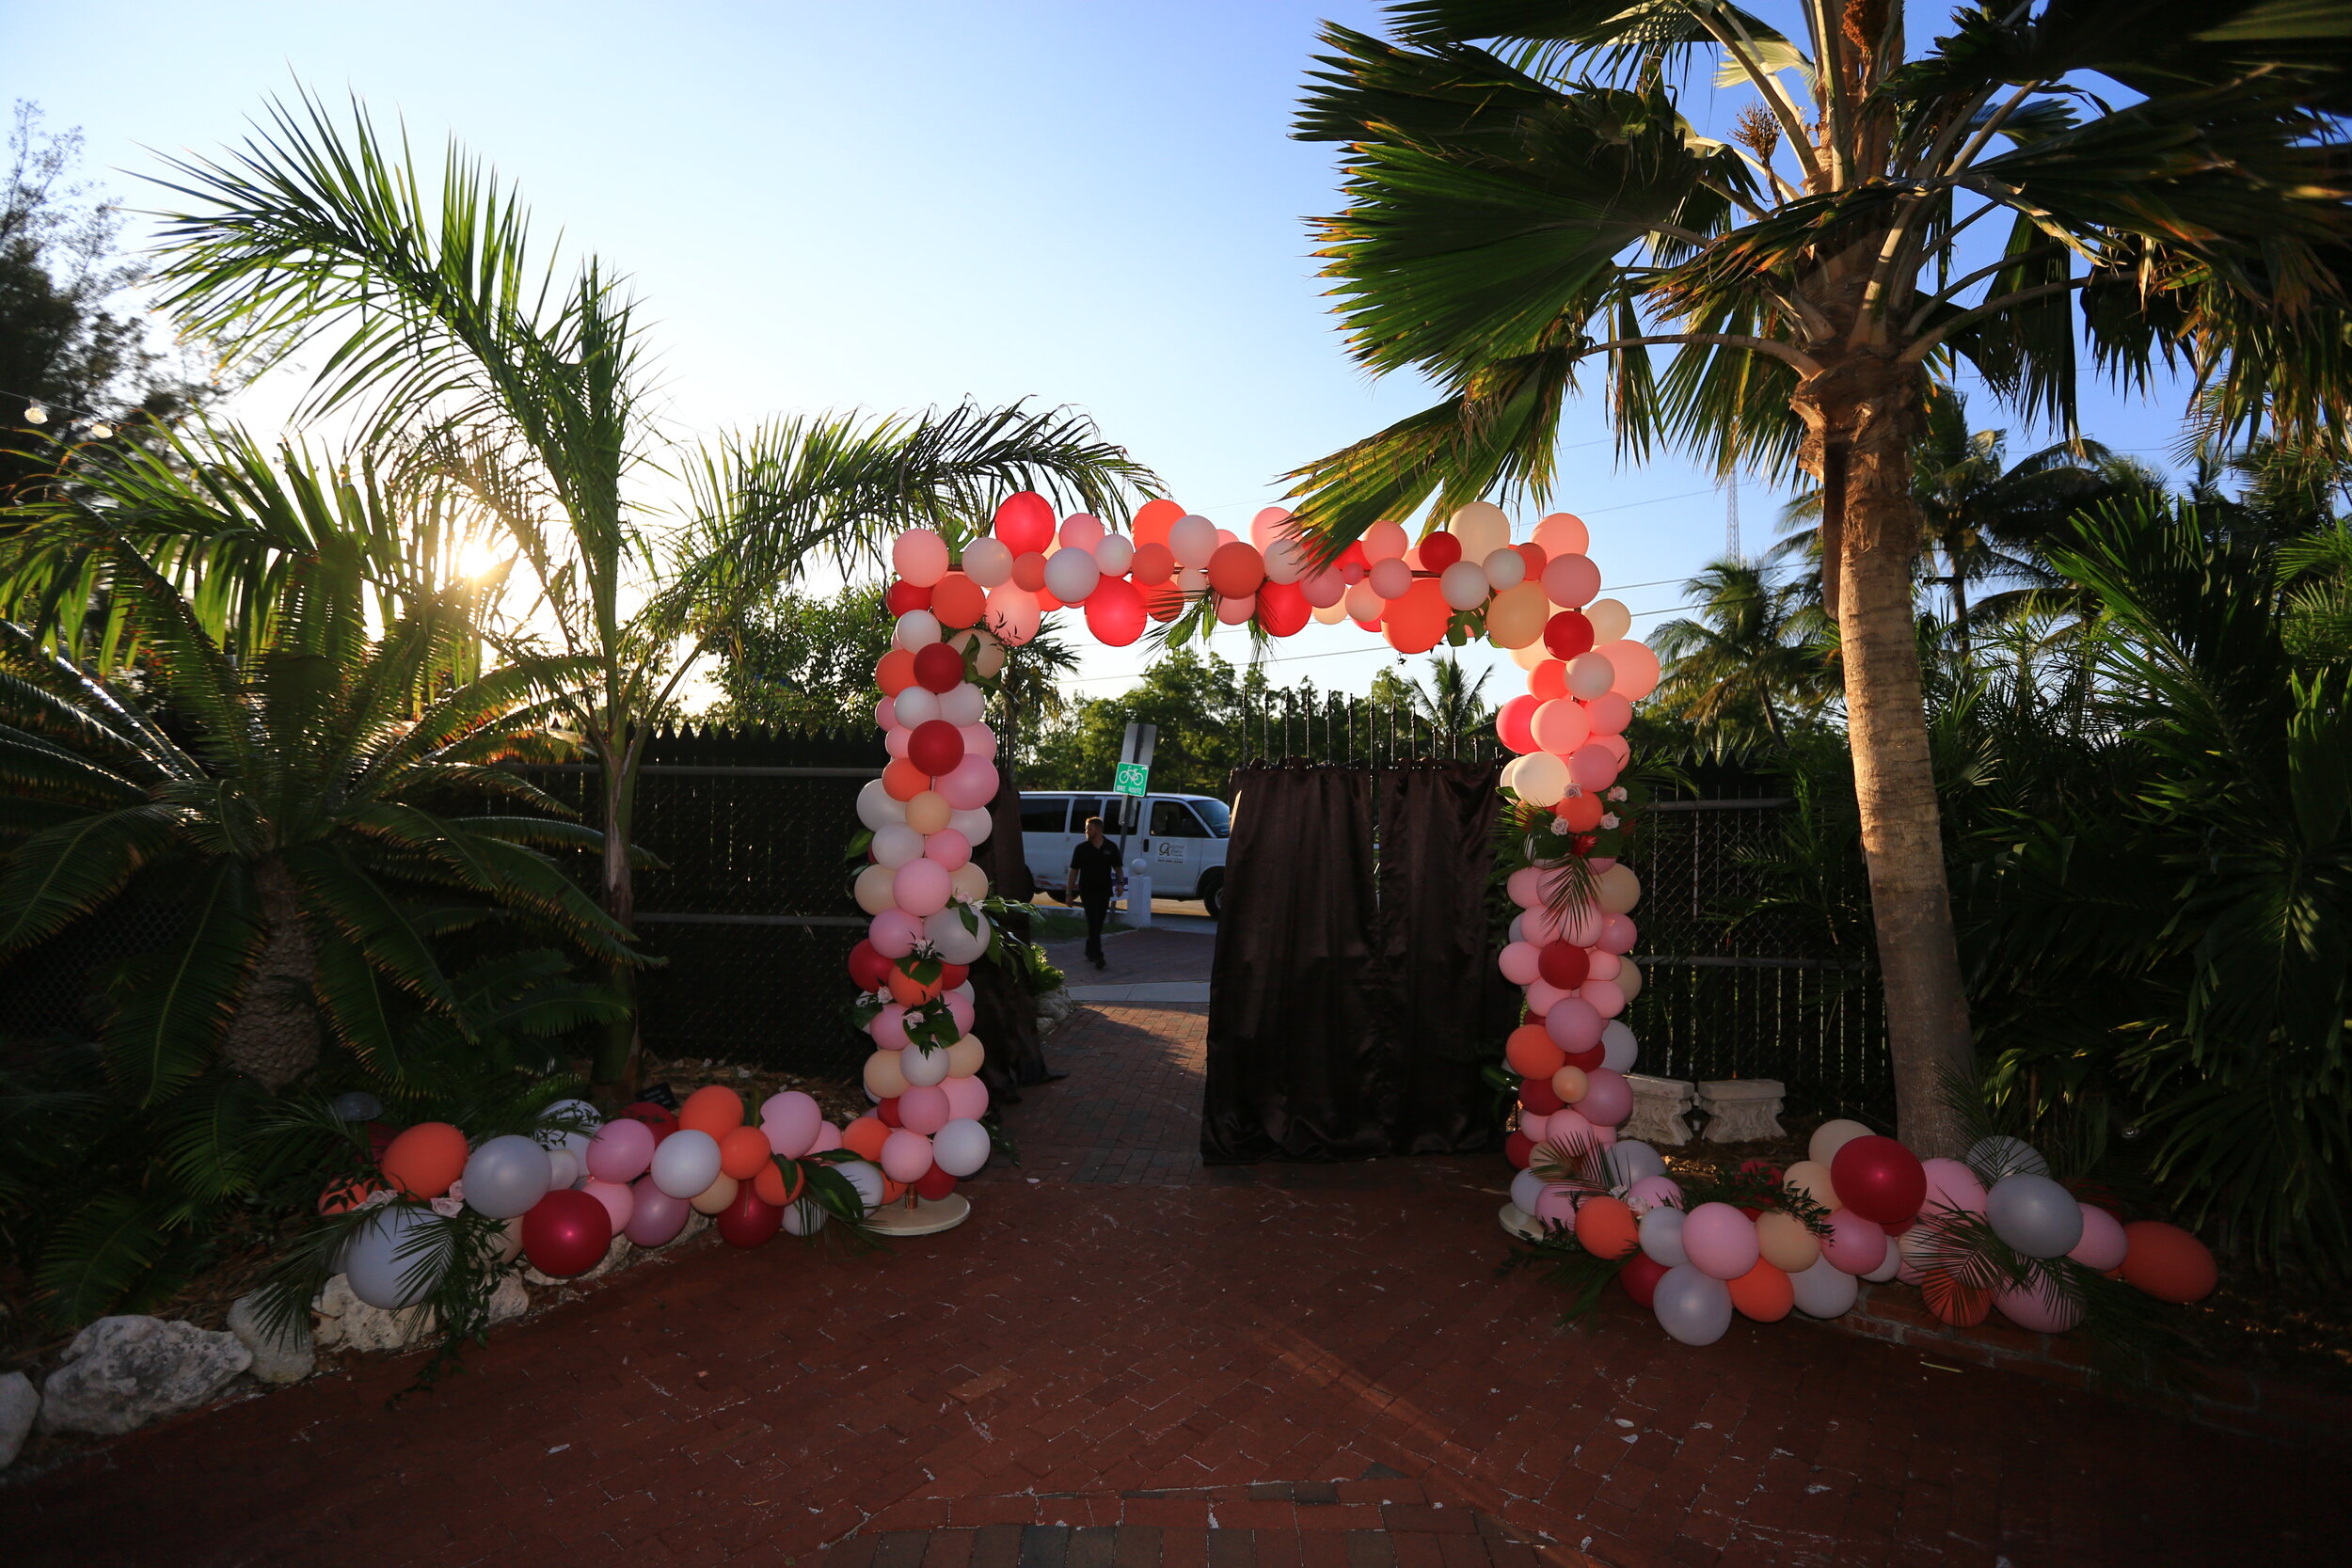  Key West Garden Club at West Martello Tower | Photo by Solaris Photography 